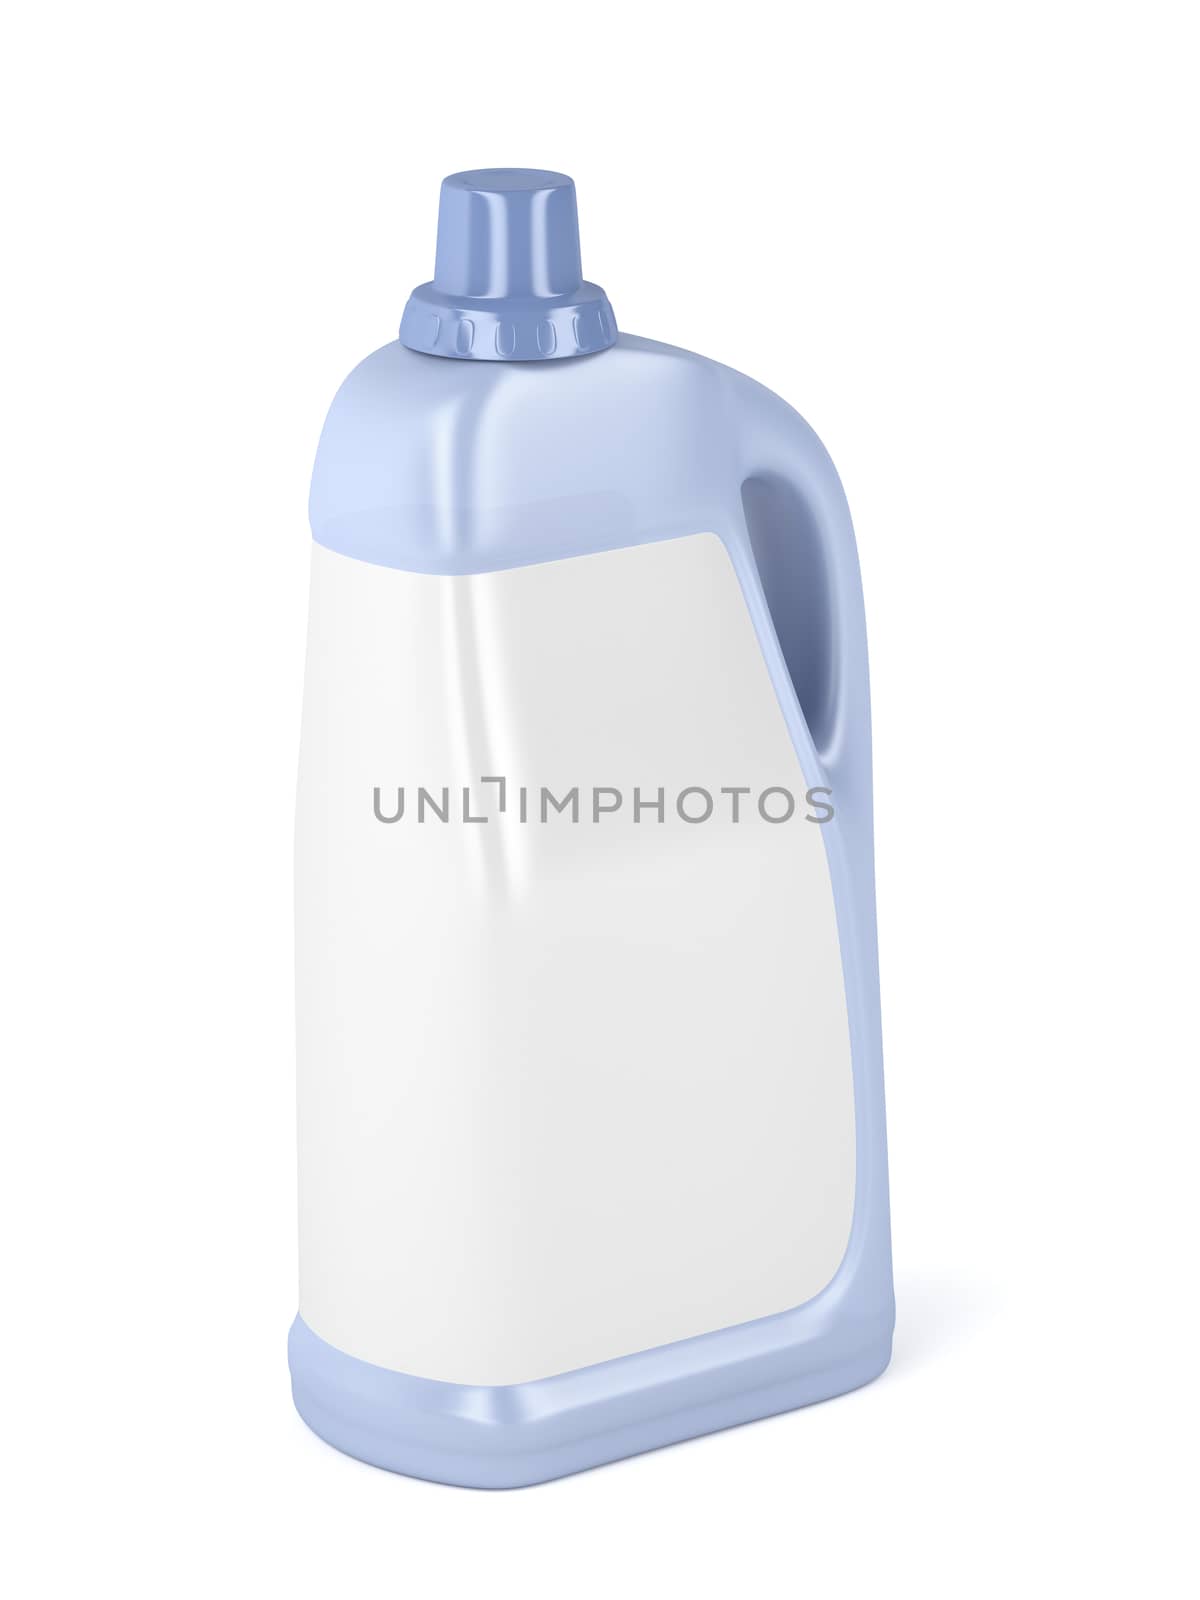 Big plastic bottle for liquid detergent by magraphics